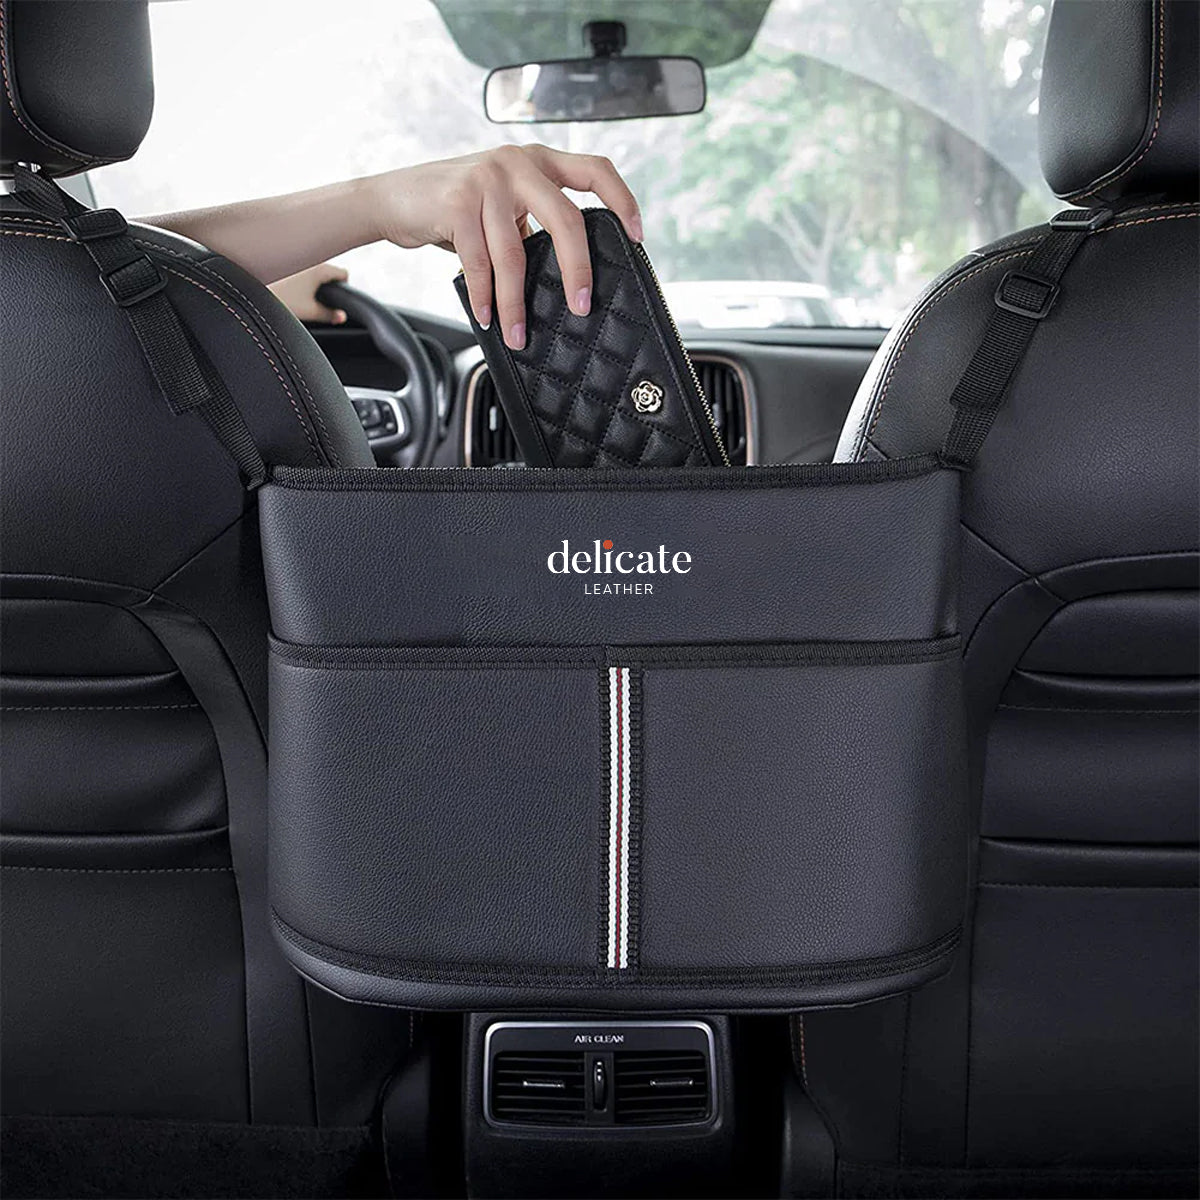 Maserati Car Purse Holder: Keep Your Bag Secure and Accessible on the Go